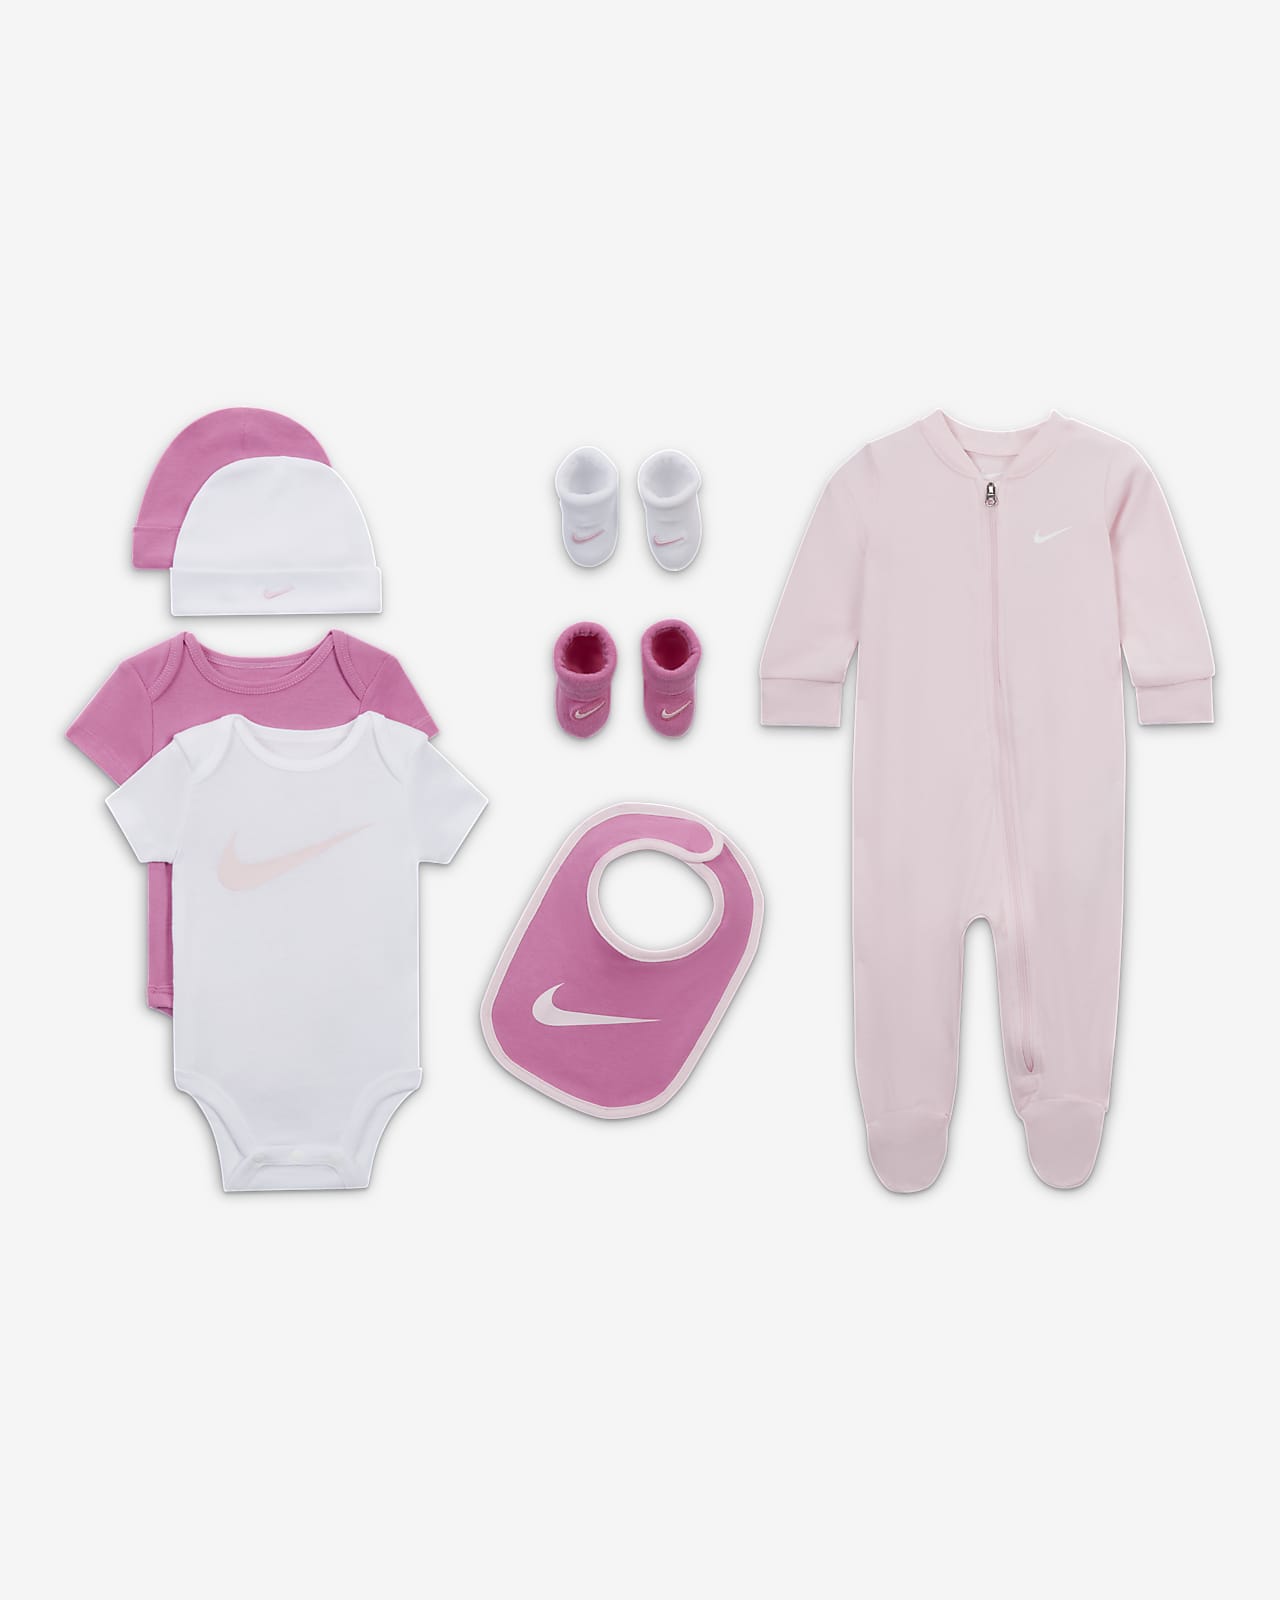 Nike Baby (0-9M) 8-Piece Boxed Gift Set